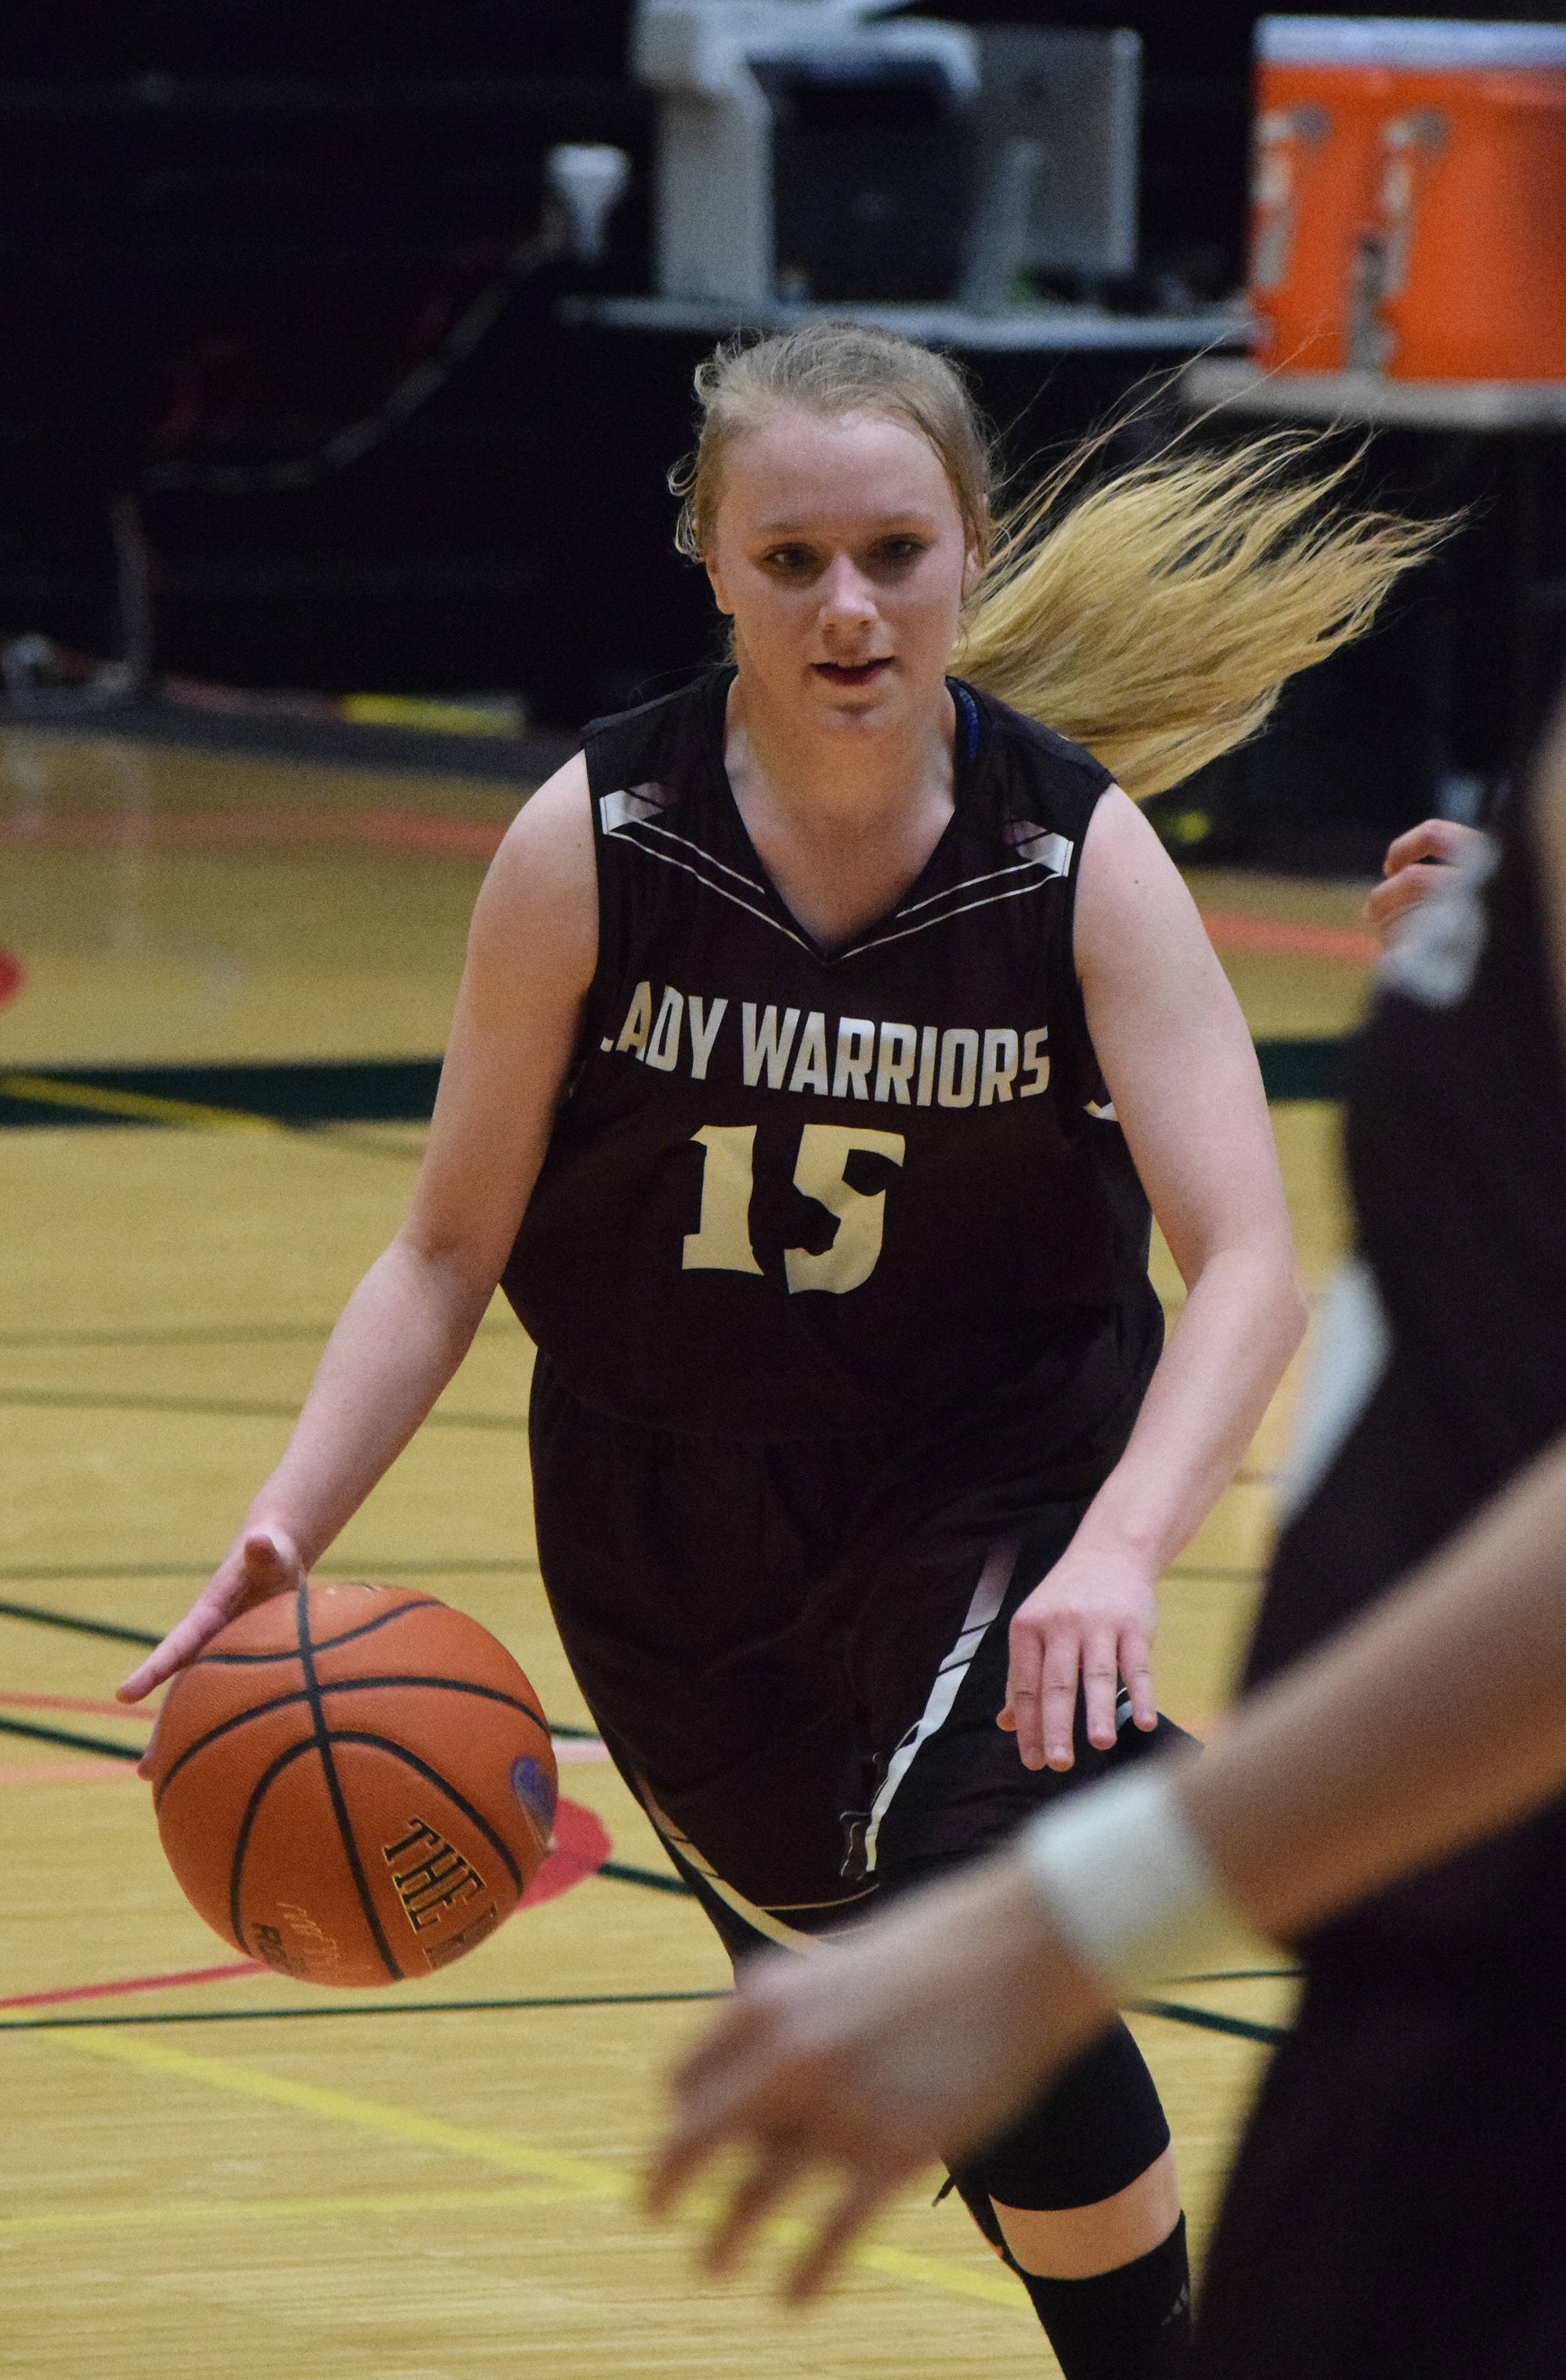 Nikolaevsk’s Markiana Yakunin looks for space Wednesday against Newhalen at the Class 1A state basketball championships at the Alaska Airlines Center in Anchorage. (Photo by Joey Klecka/Peninsula Clarion)